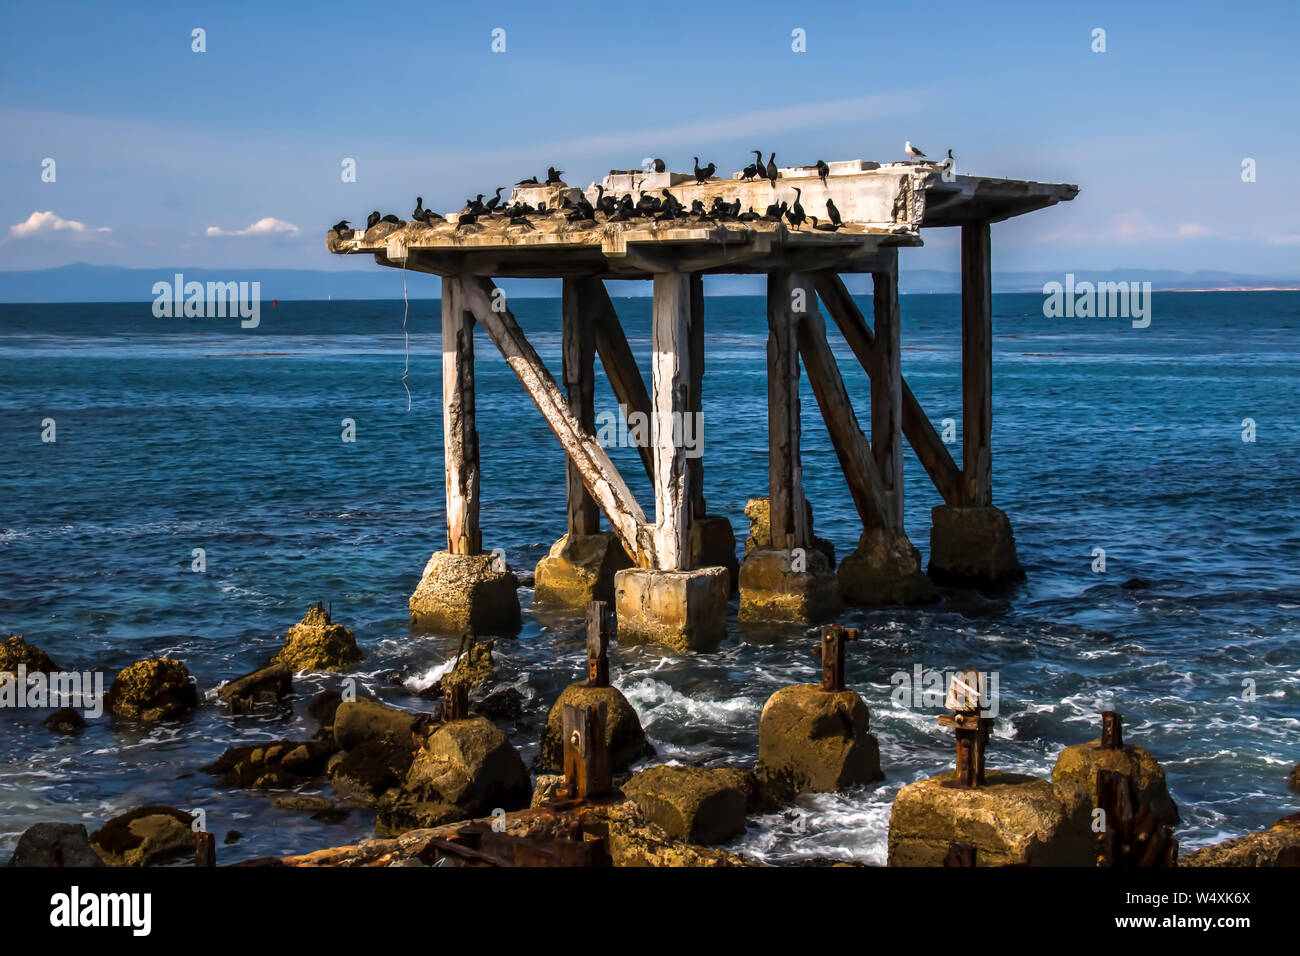 Seabirds colonize old crumbling pier from abandoned cannery in Monterey California coastal seascape. Stock Photo